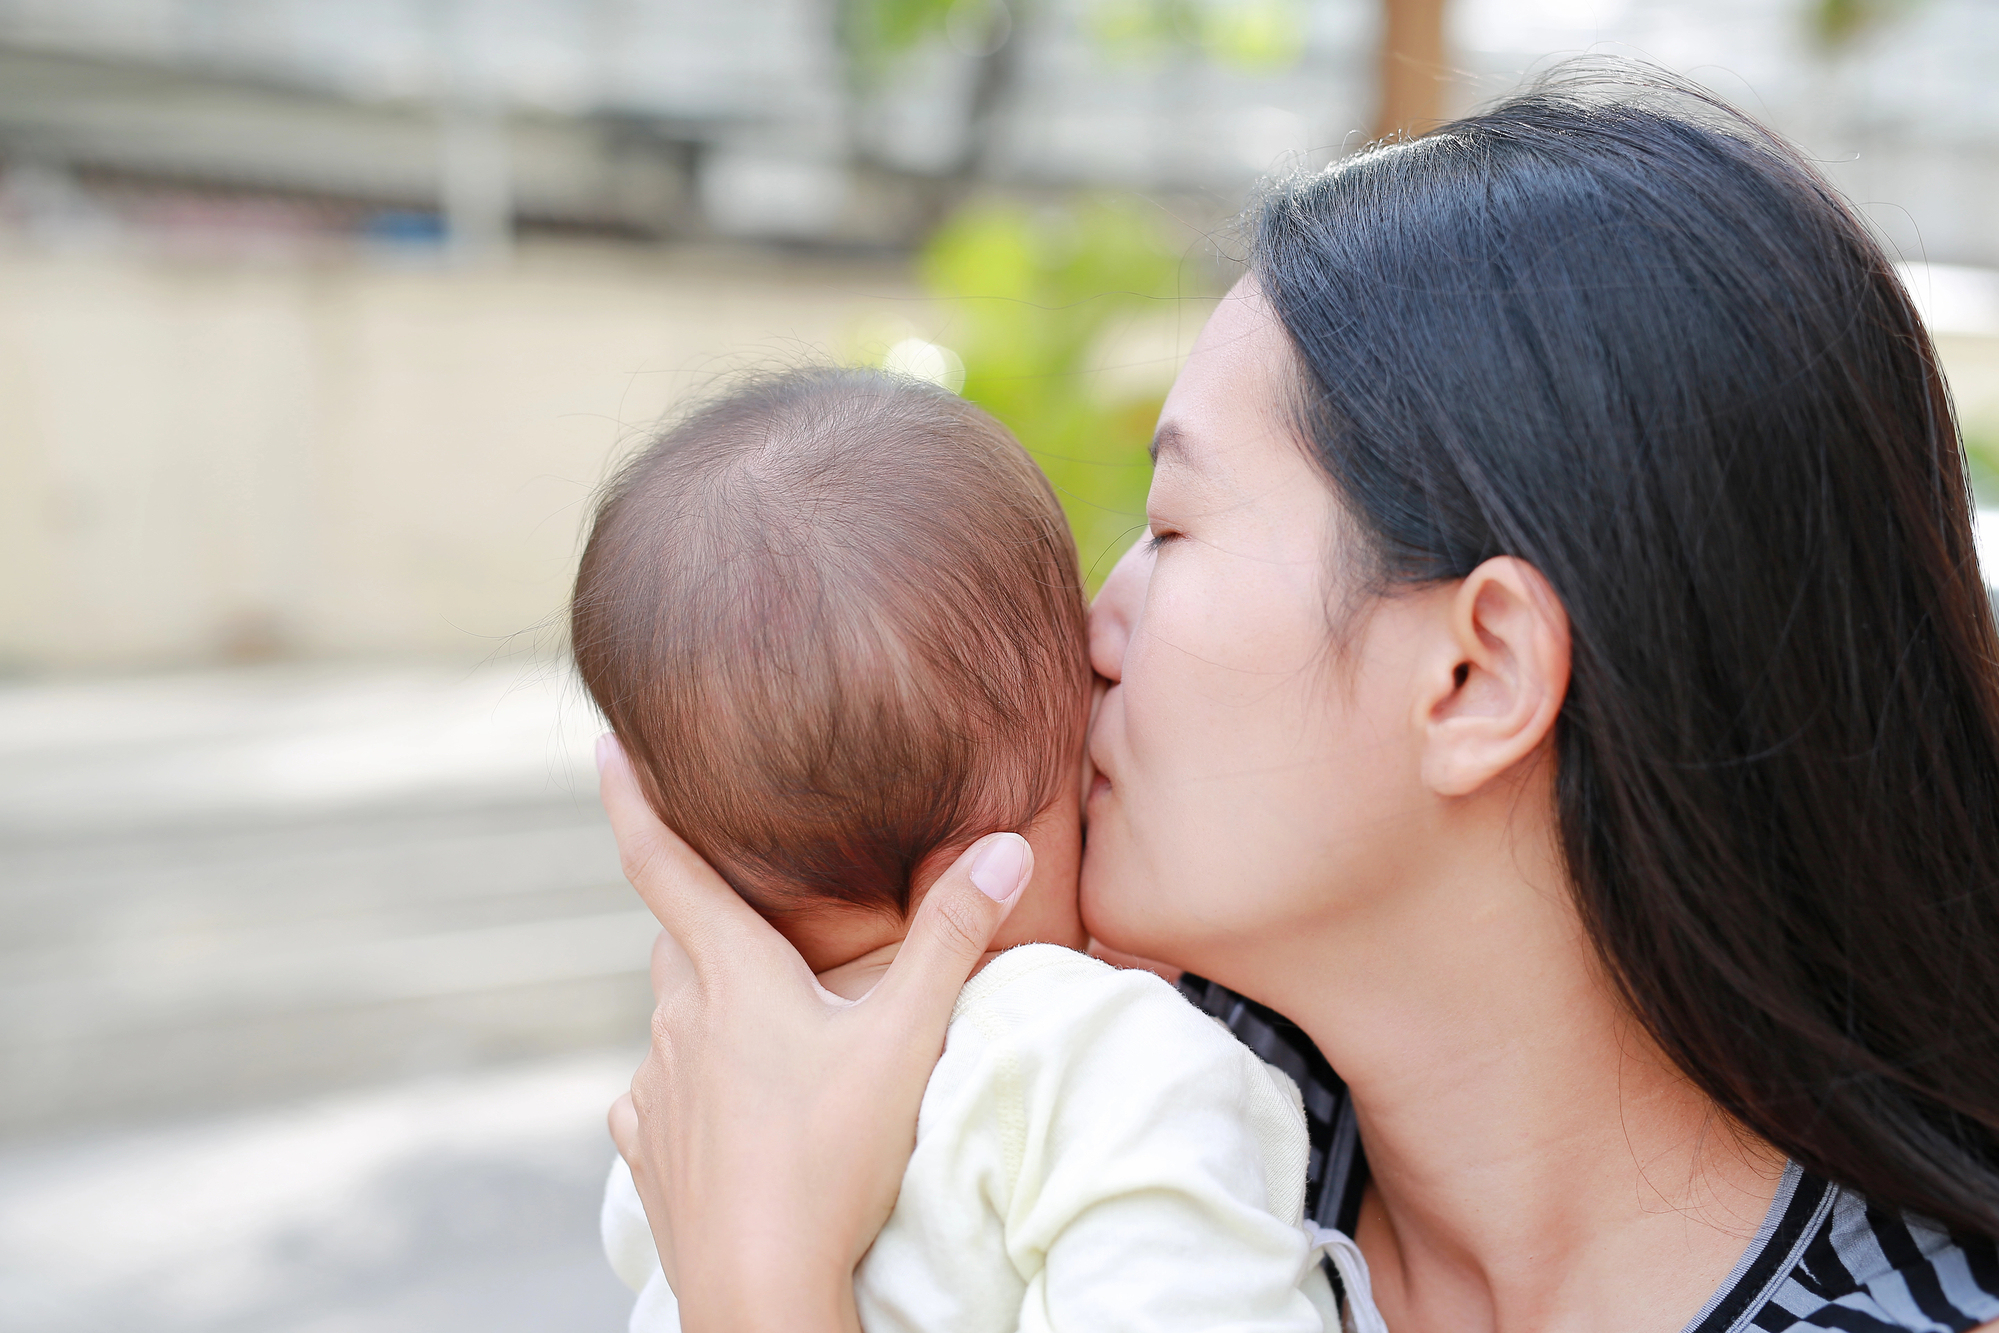 Asian mother carrying and kissing her infant outdoors.